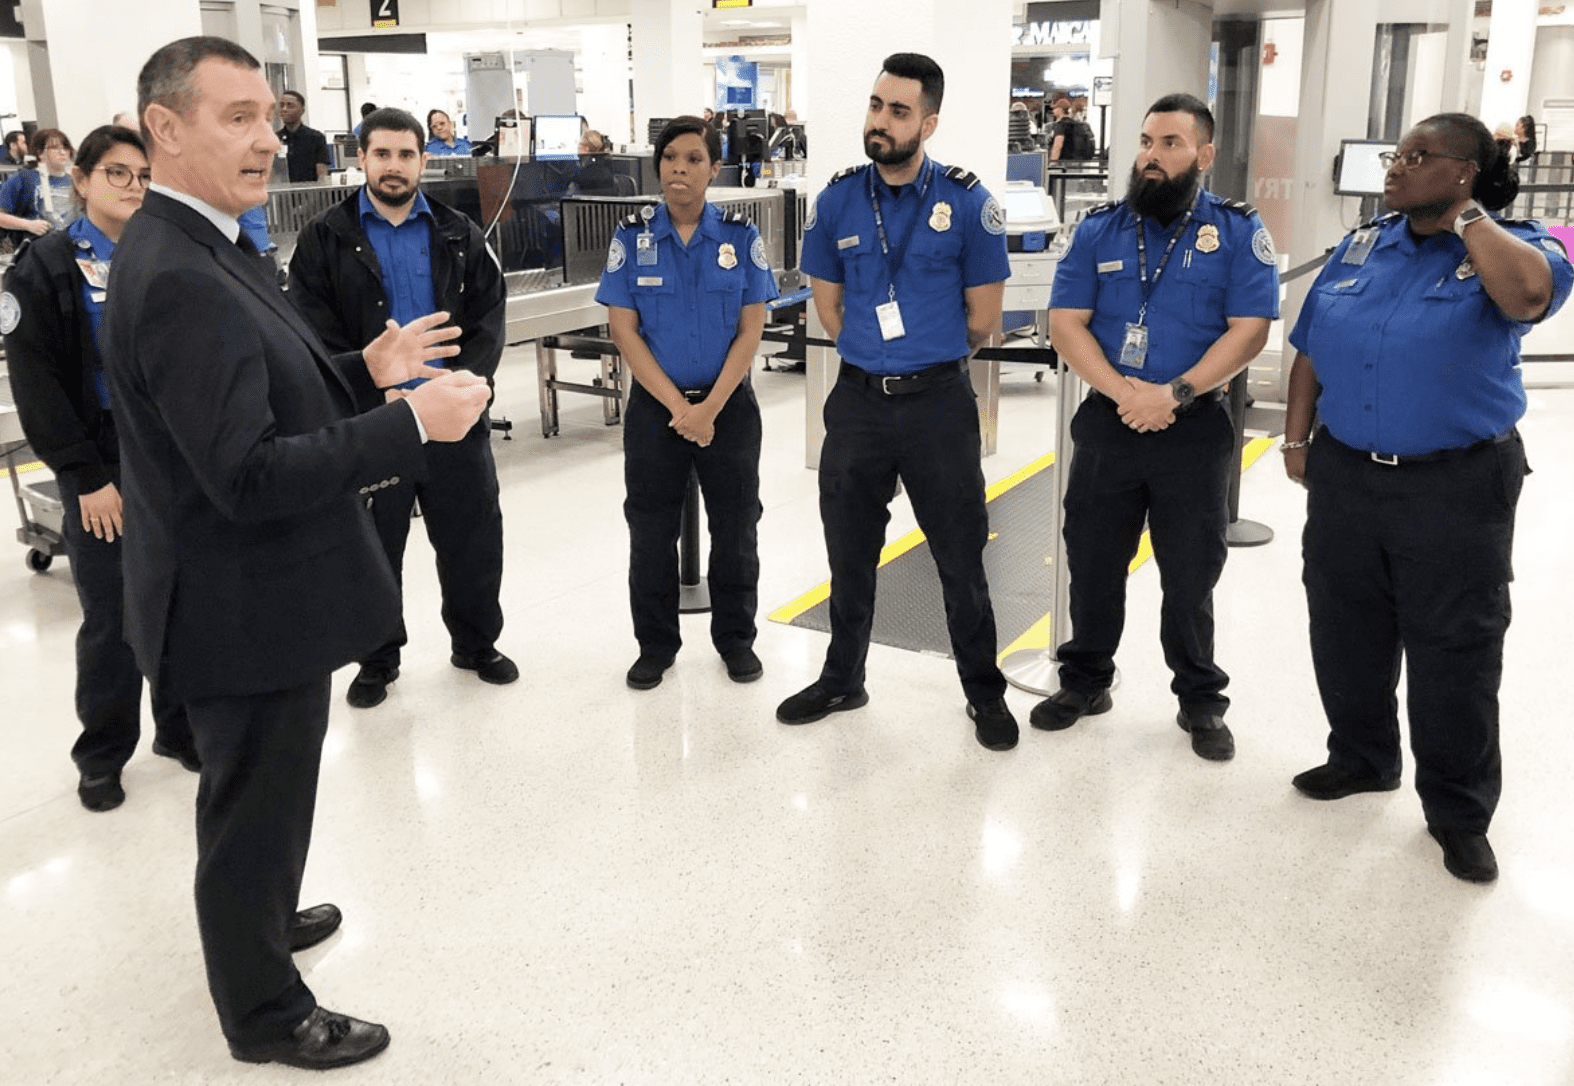 TSA Employees’ Union Calls on TSA to Provide Better Protection for Airport Security Screeners